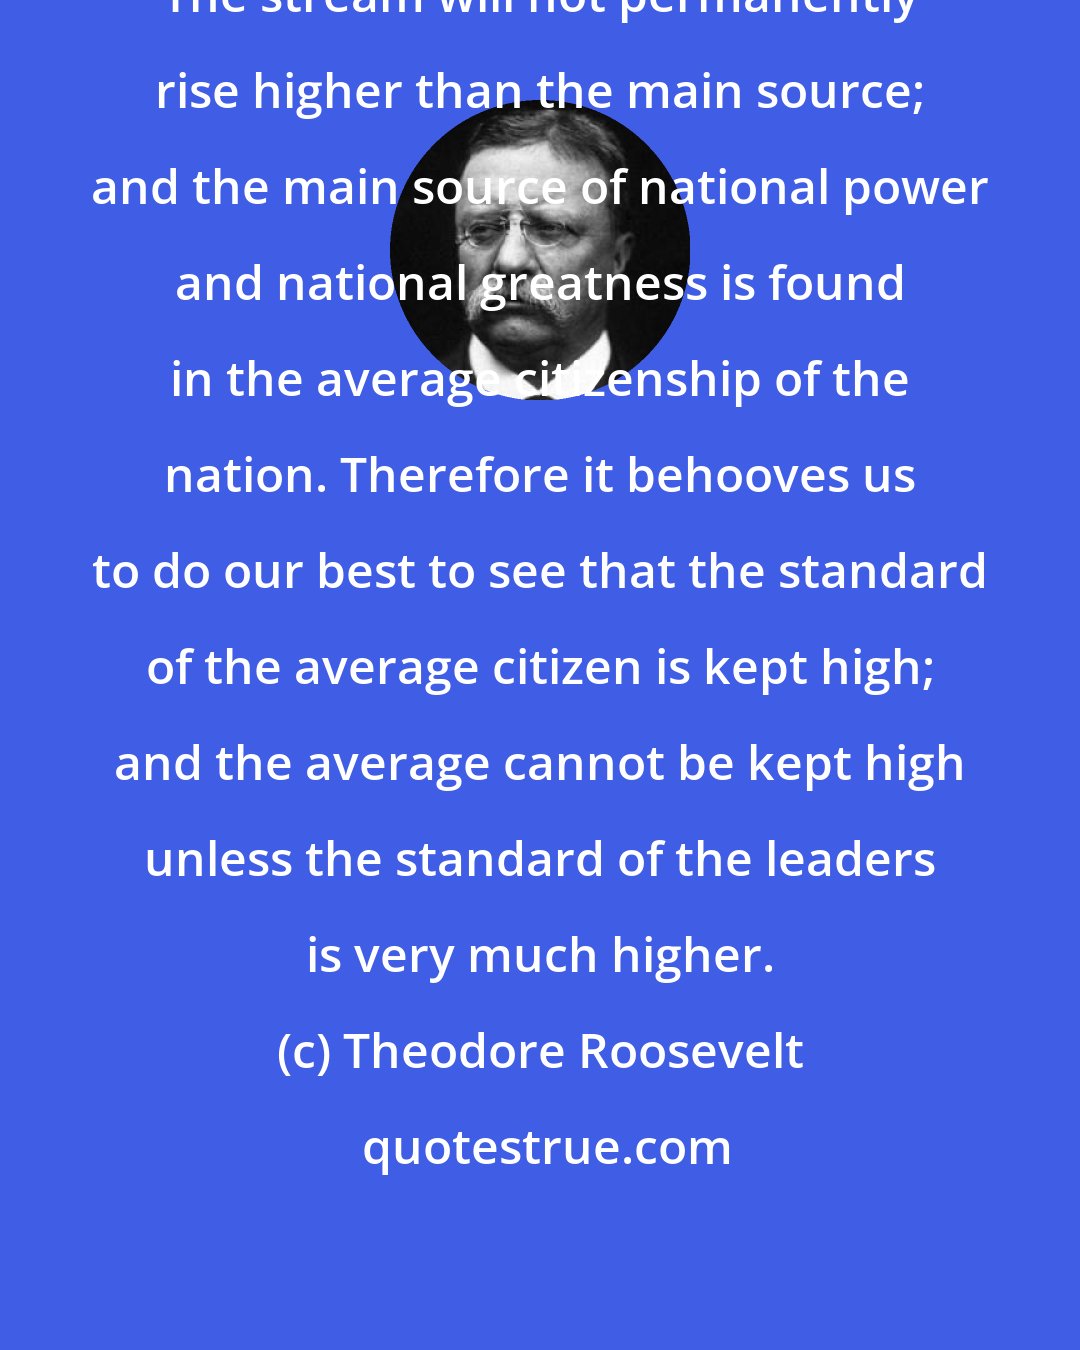 Theodore Roosevelt: The stream will not permanently rise higher than the main source; and the main source of national power and national greatness is found in the average citizenship of the nation. Therefore it behooves us to do our best to see that the standard of the average citizen is kept high; and the average cannot be kept high unless the standard of the leaders is very much higher.